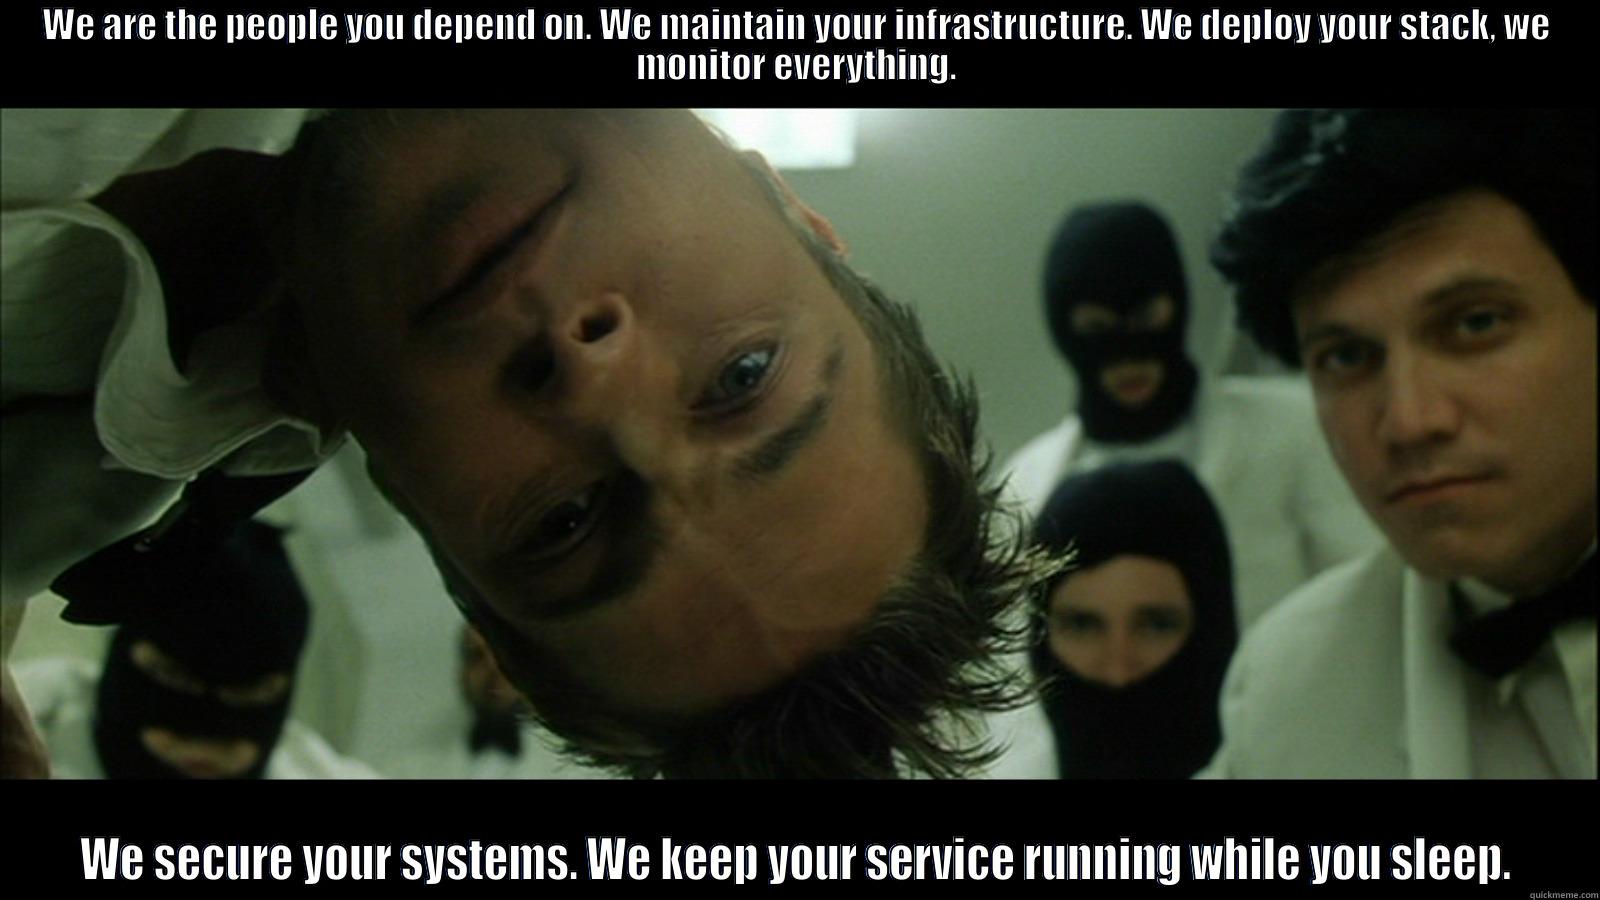 WE ARE THE PEOPLE YOU DEPEND ON. WE MAINTAIN YOUR INFRASTRUCTURE. WE DEPLOY YOUR STACK, WE MONITOR EVERYTHING. WE SECURE YOUR SYSTEMS. WE KEEP YOUR SERVICE RUNNING WHILE YOU SLEEP. Misc